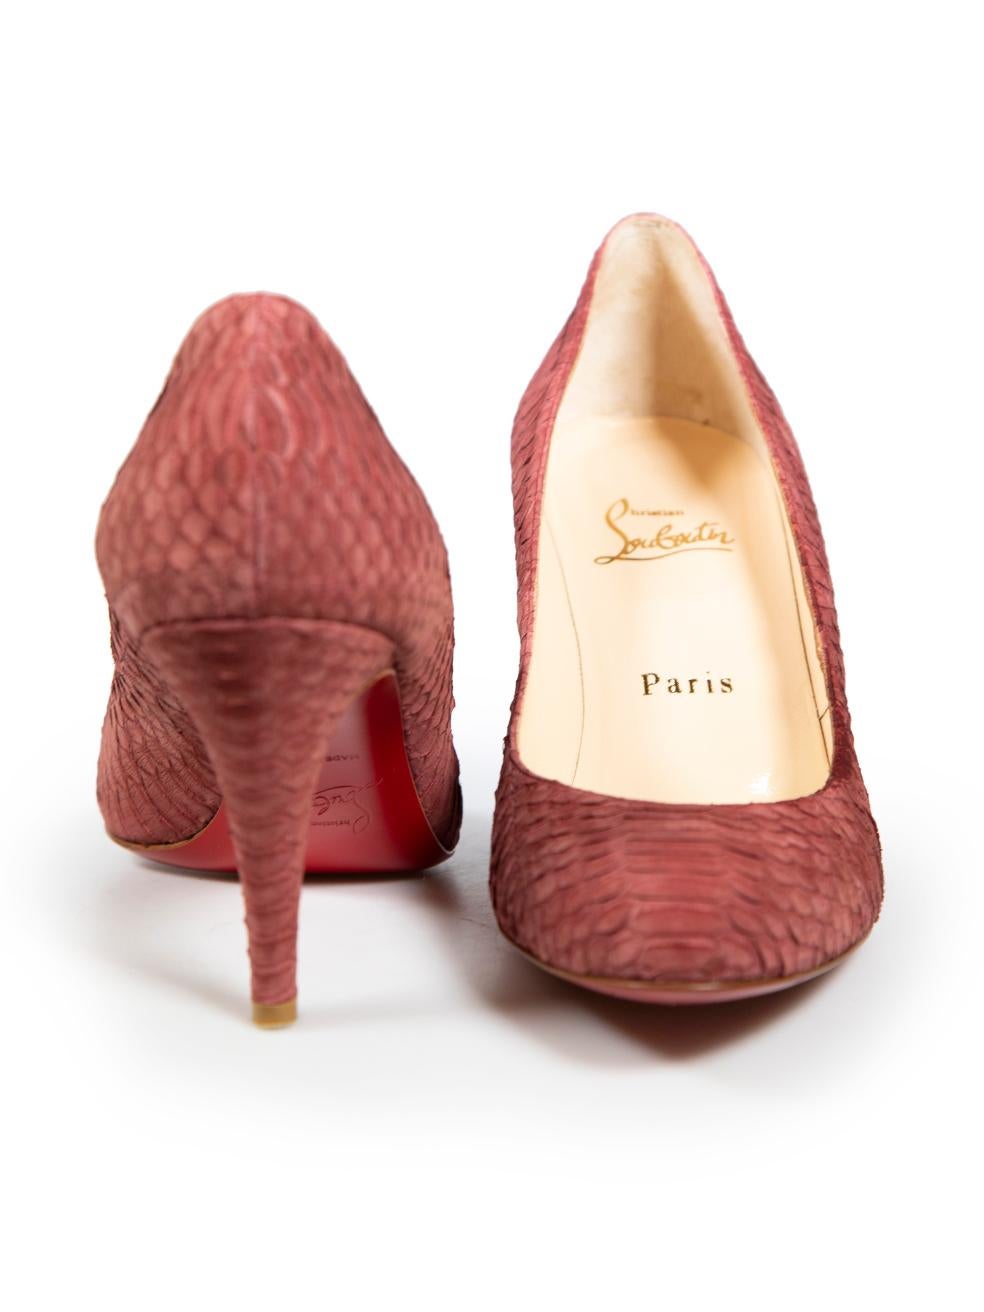 Christian Louboutin Pink Python Suede Pumps Size IT 37.5 In Good Condition For Sale In London, GB